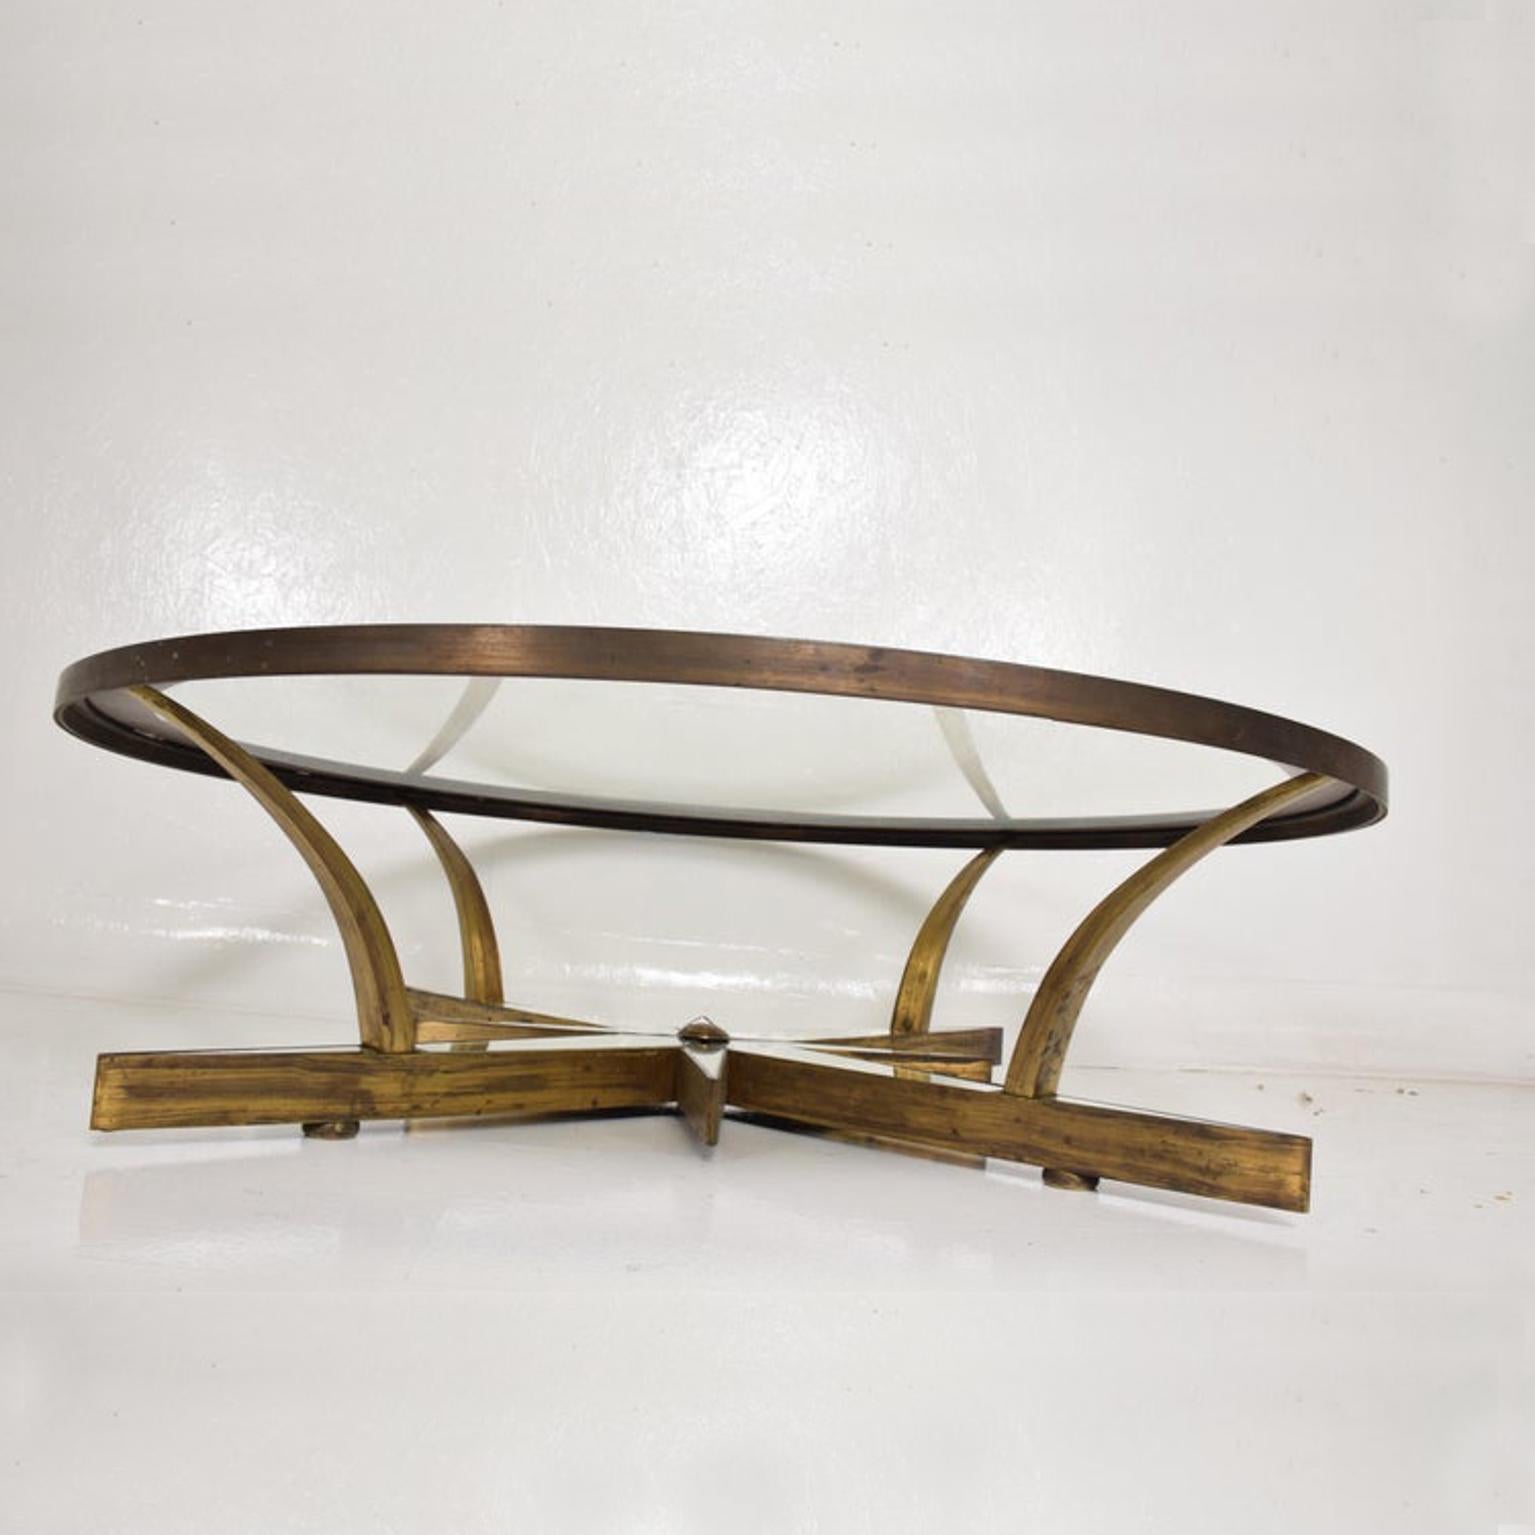 Mexican Arturo Pani Center STAR Glass Cocktail Coffee Table in Brass Modern 1950s Mexico